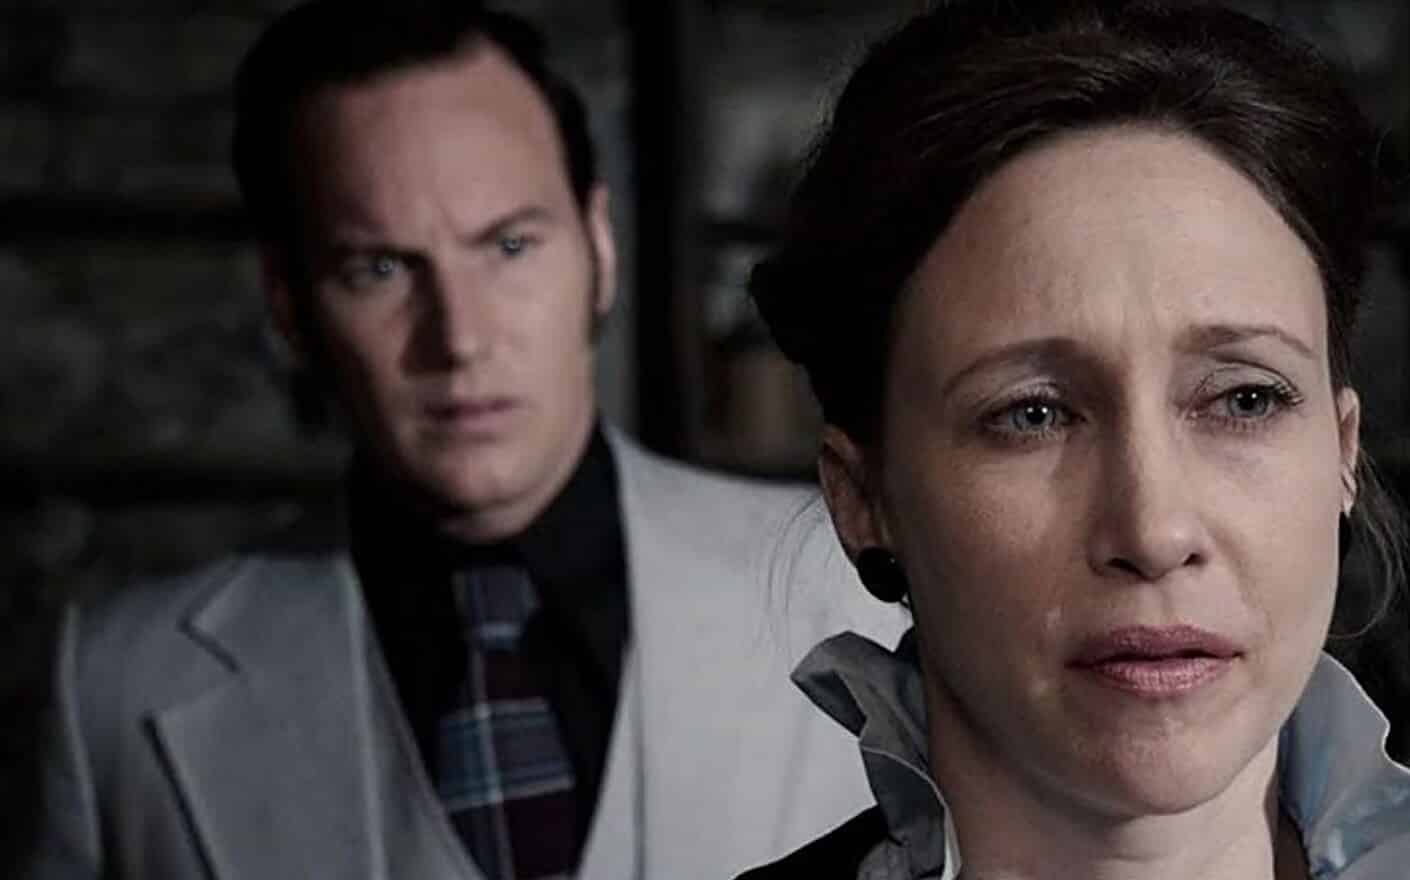 The conjuring 3 review